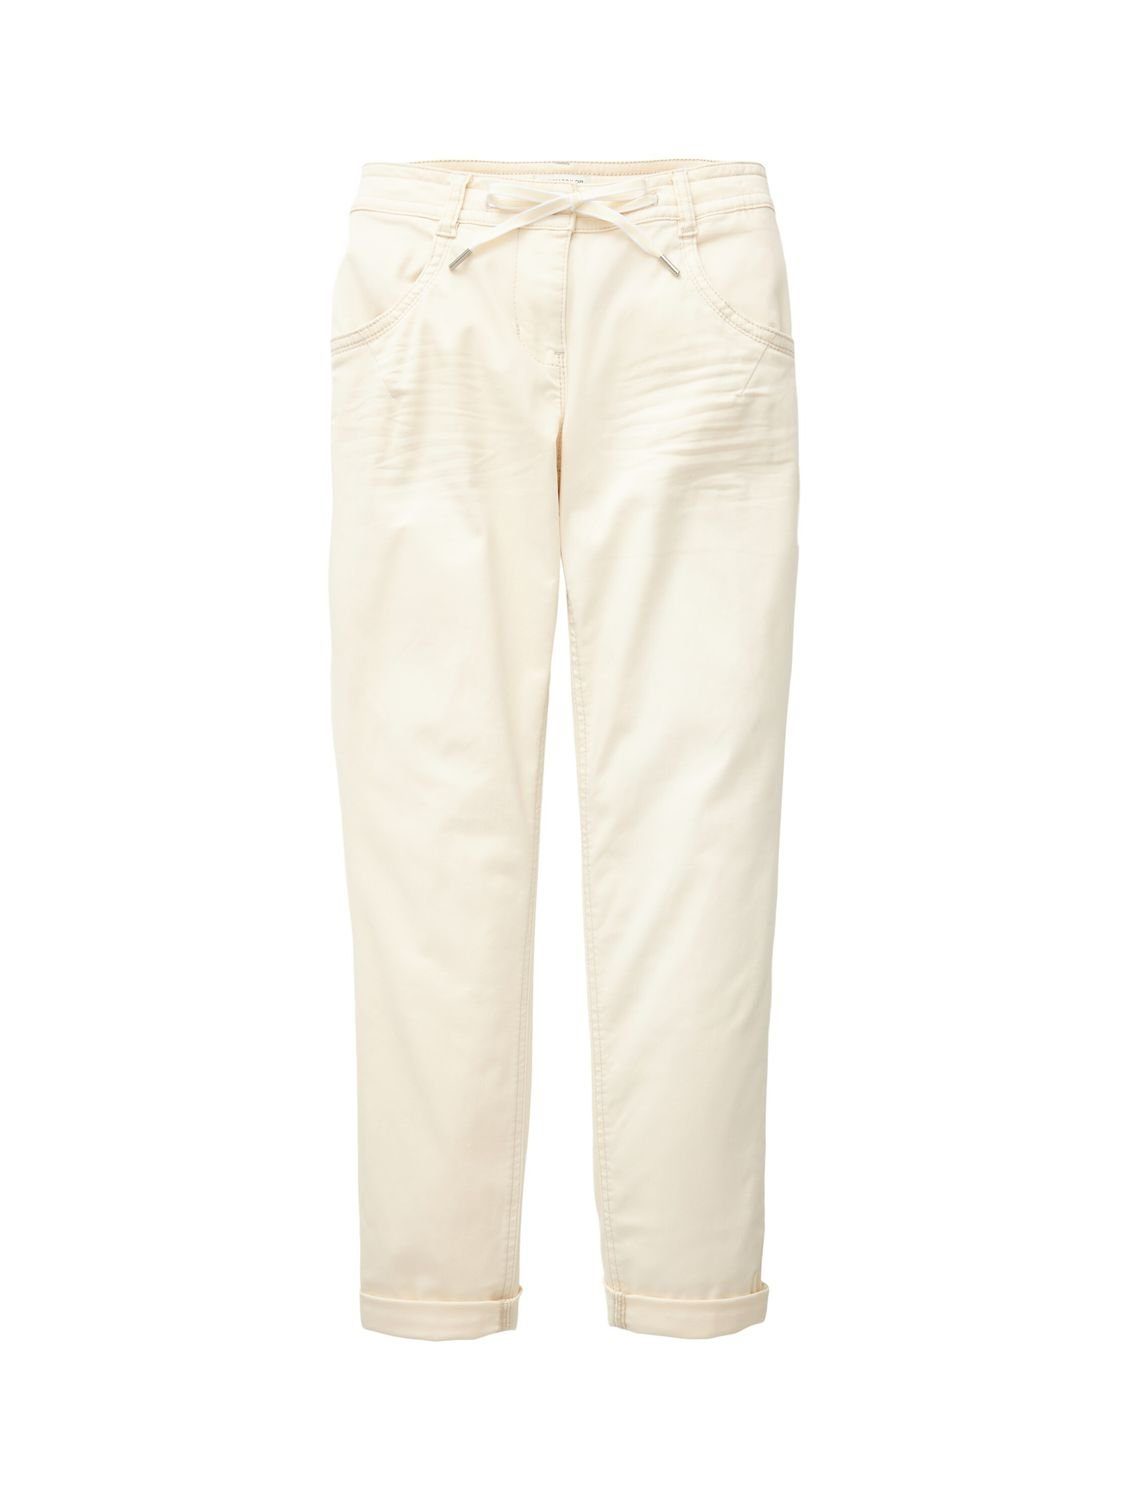 RELAXED 31649 Relax-fit-Jeans TAILOR Stretch TOM Ivory Ecru mit TAPERED